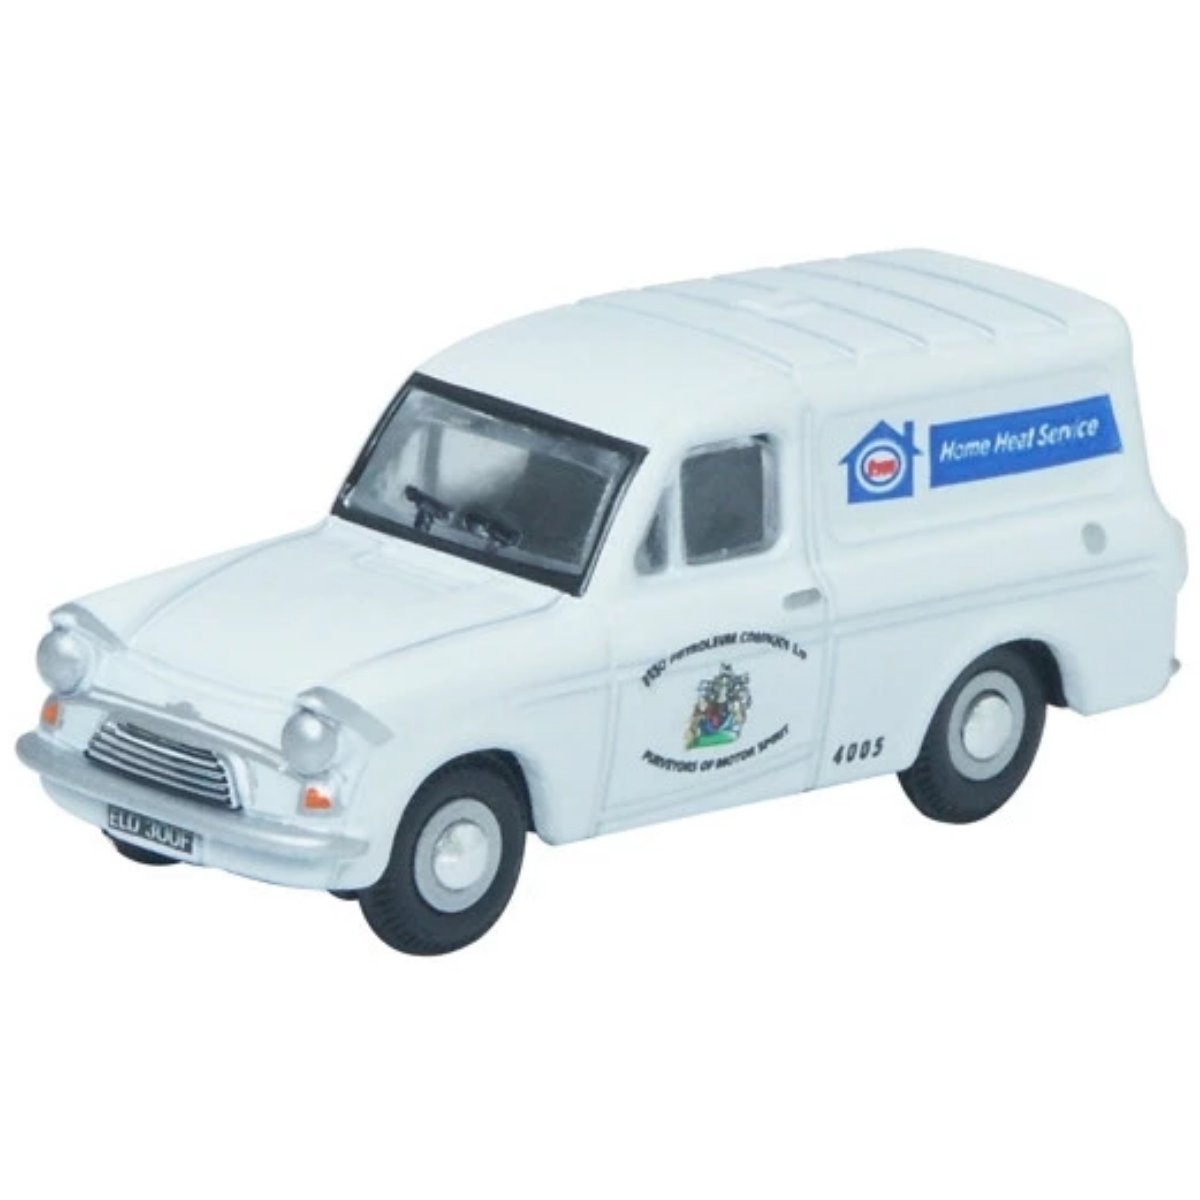 Oxford Diecast 76ANG024 Esso Service - Phillips Hobbies